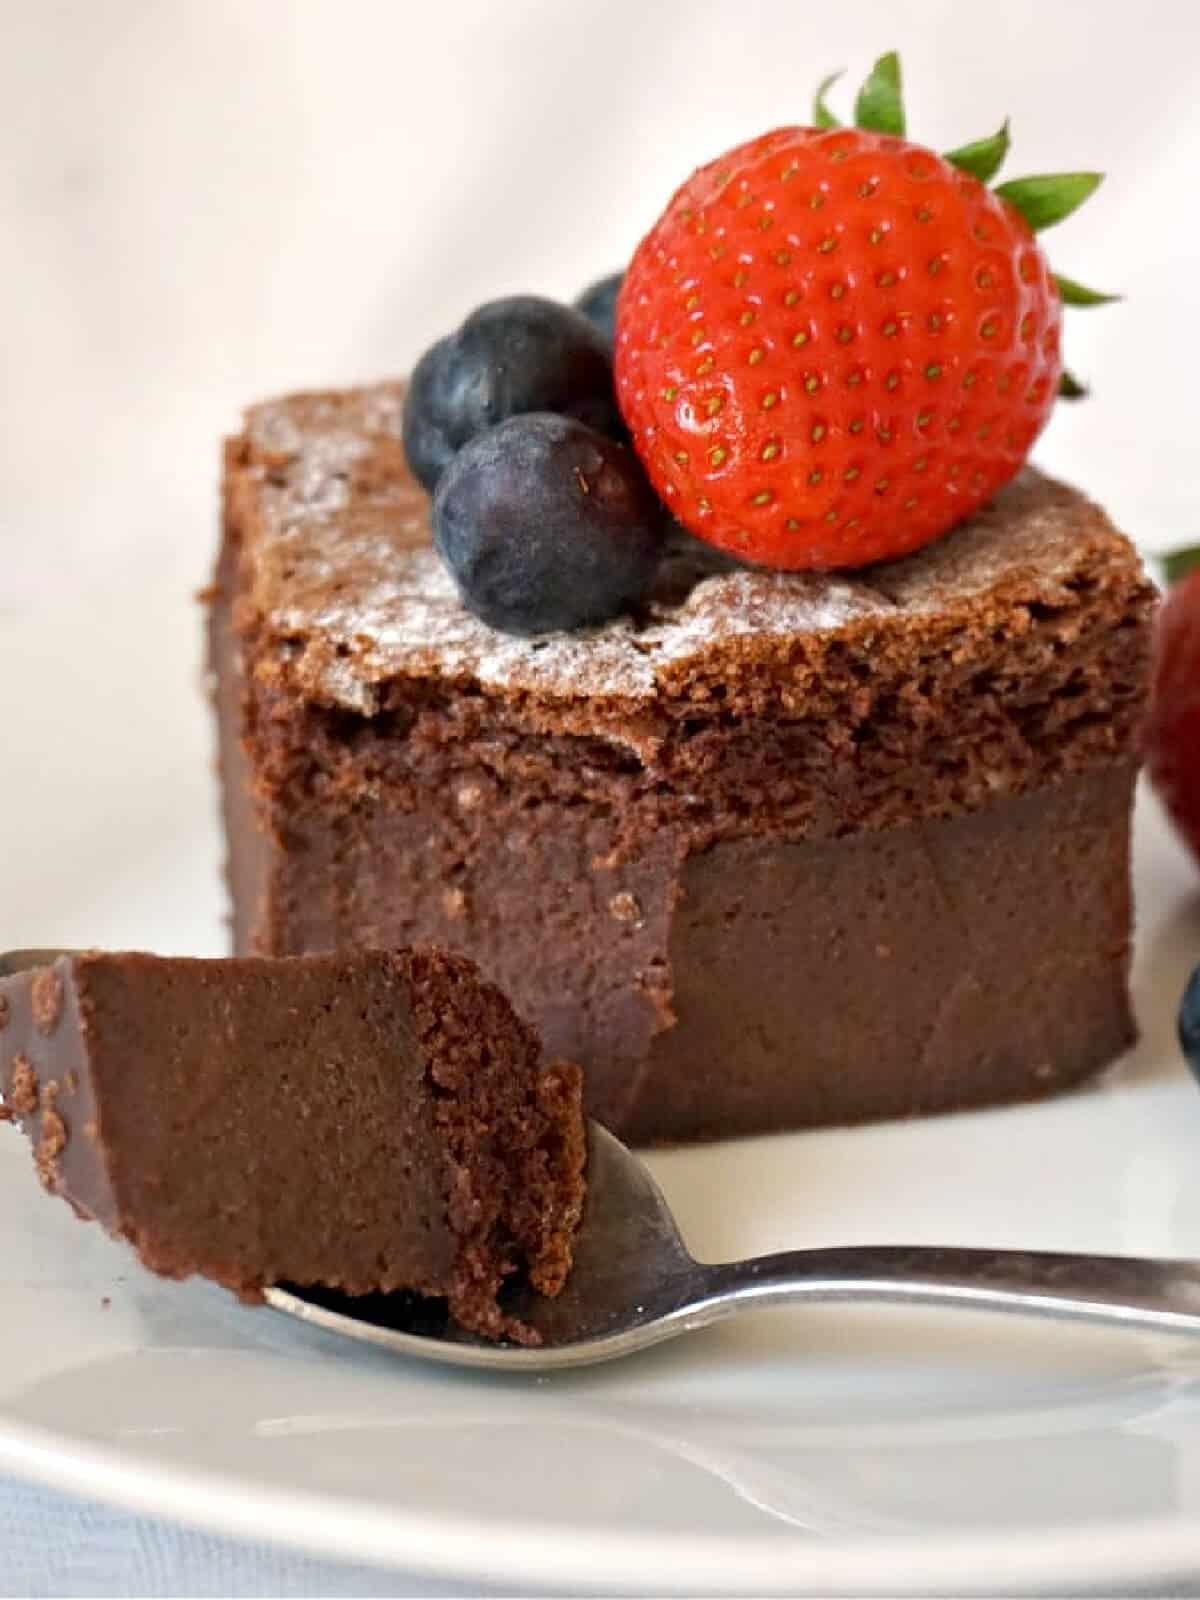 A slice of chocolate cake topped with a strawberry and 2 blueberries.